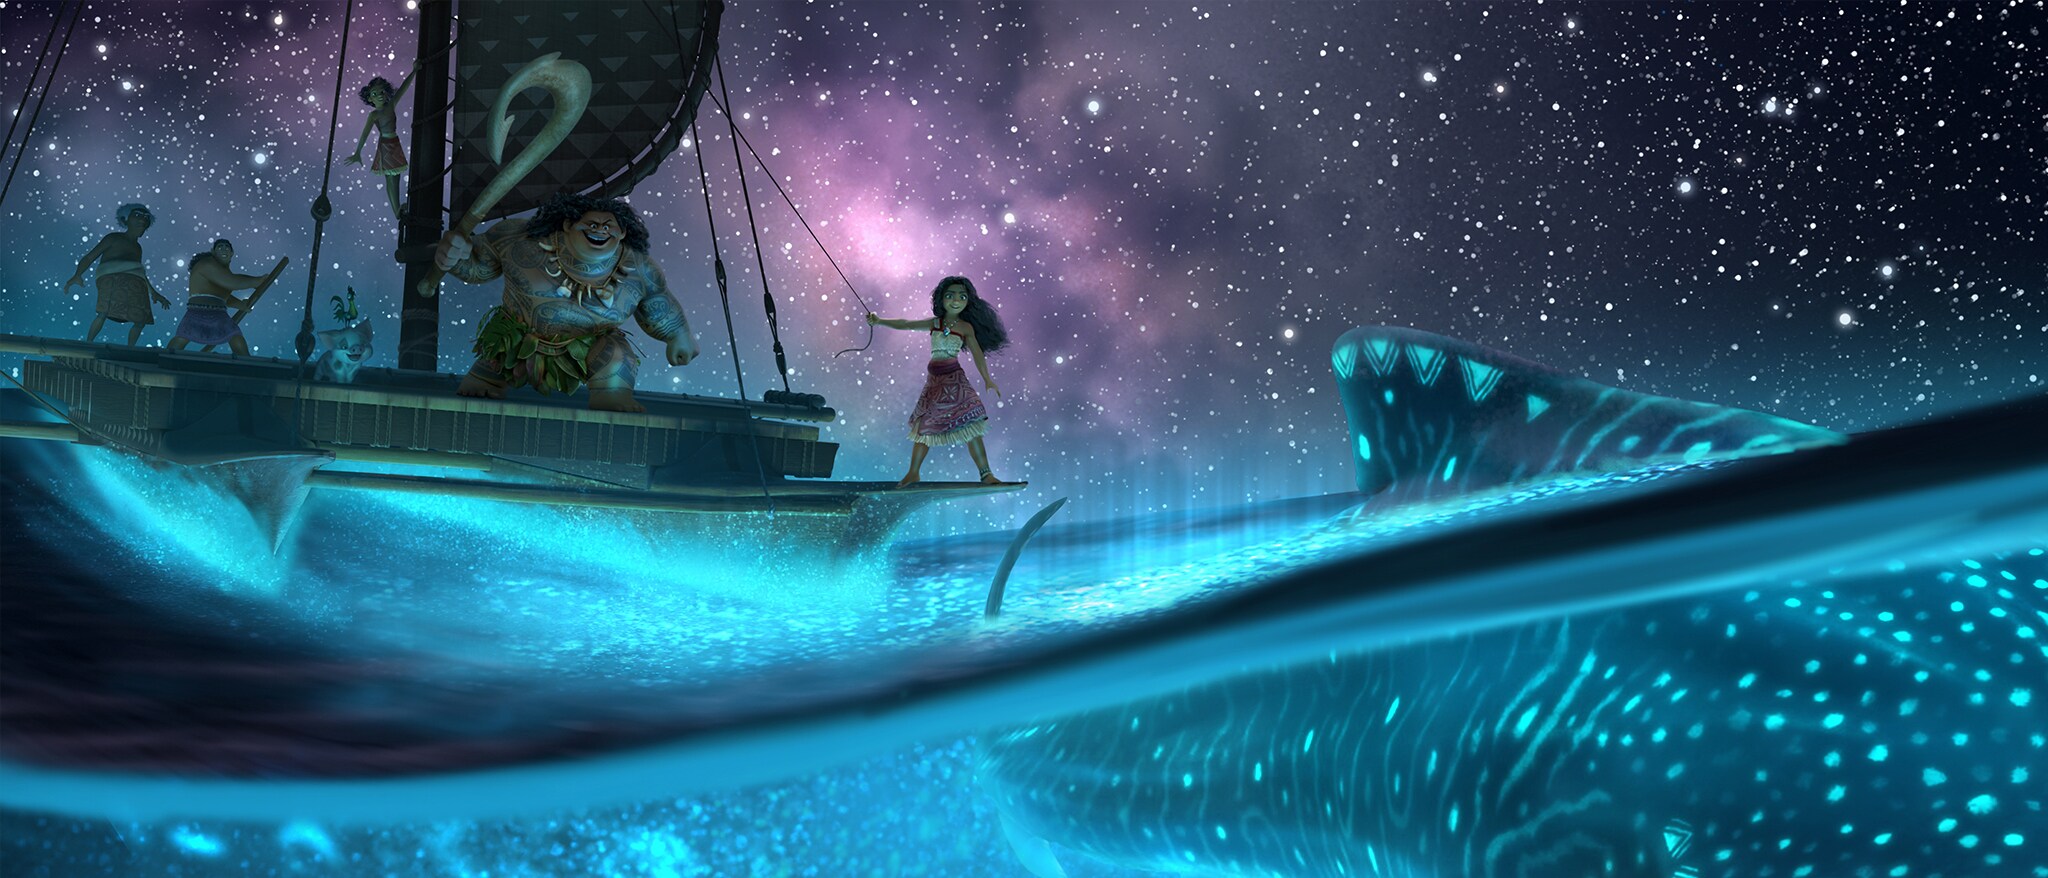 Moana 2 - Featured Content Banner